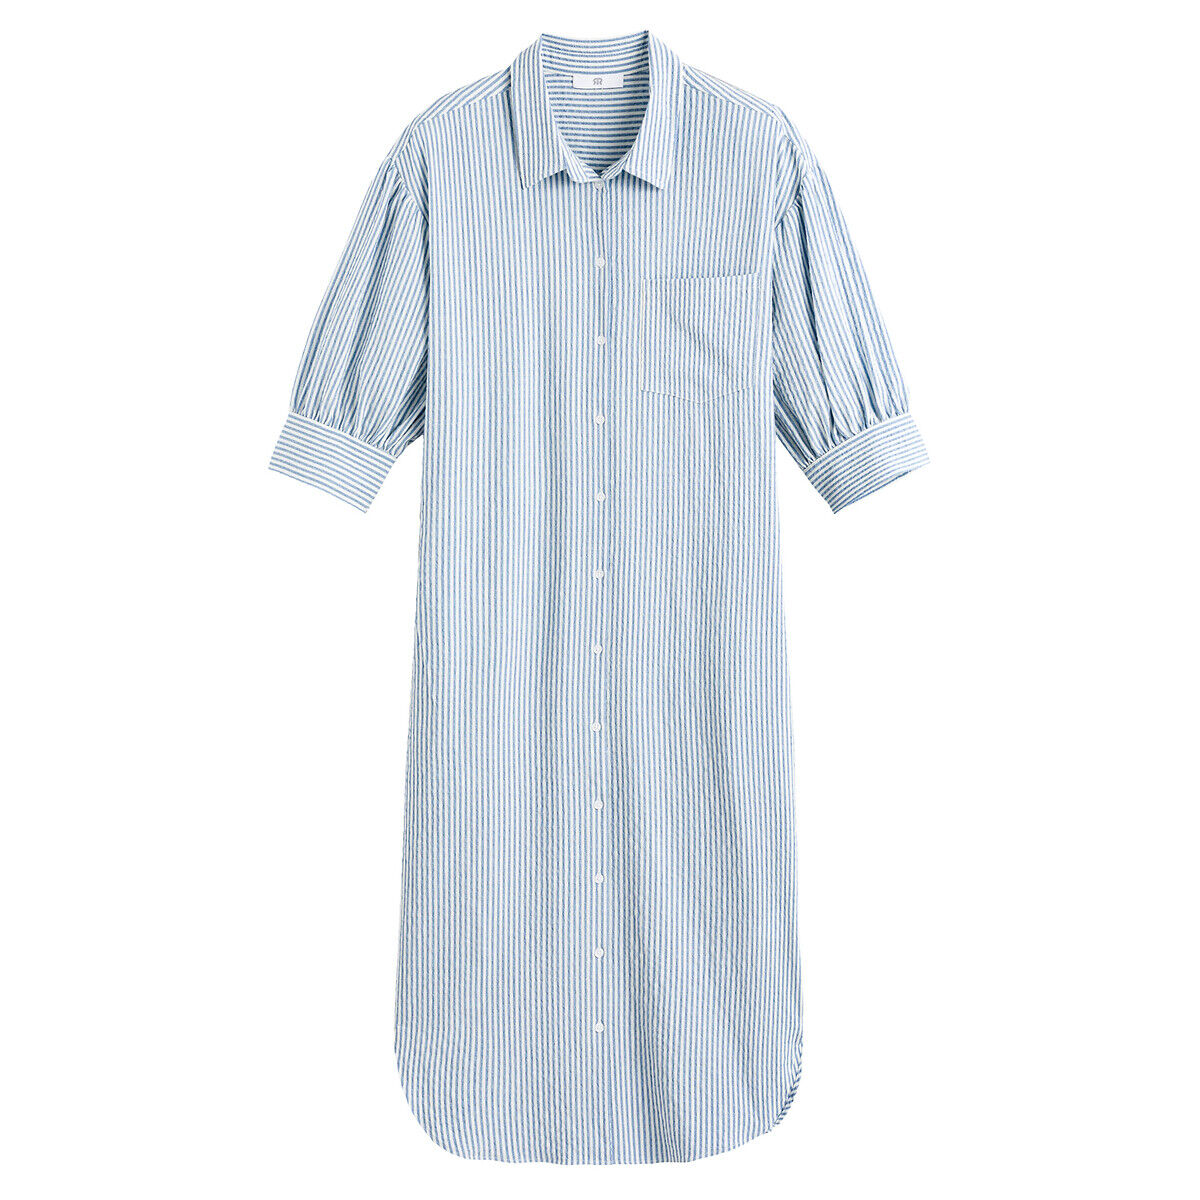 LA REDOUTE COLLECTIONS Robe chemise longue, manches 3/4 rayée